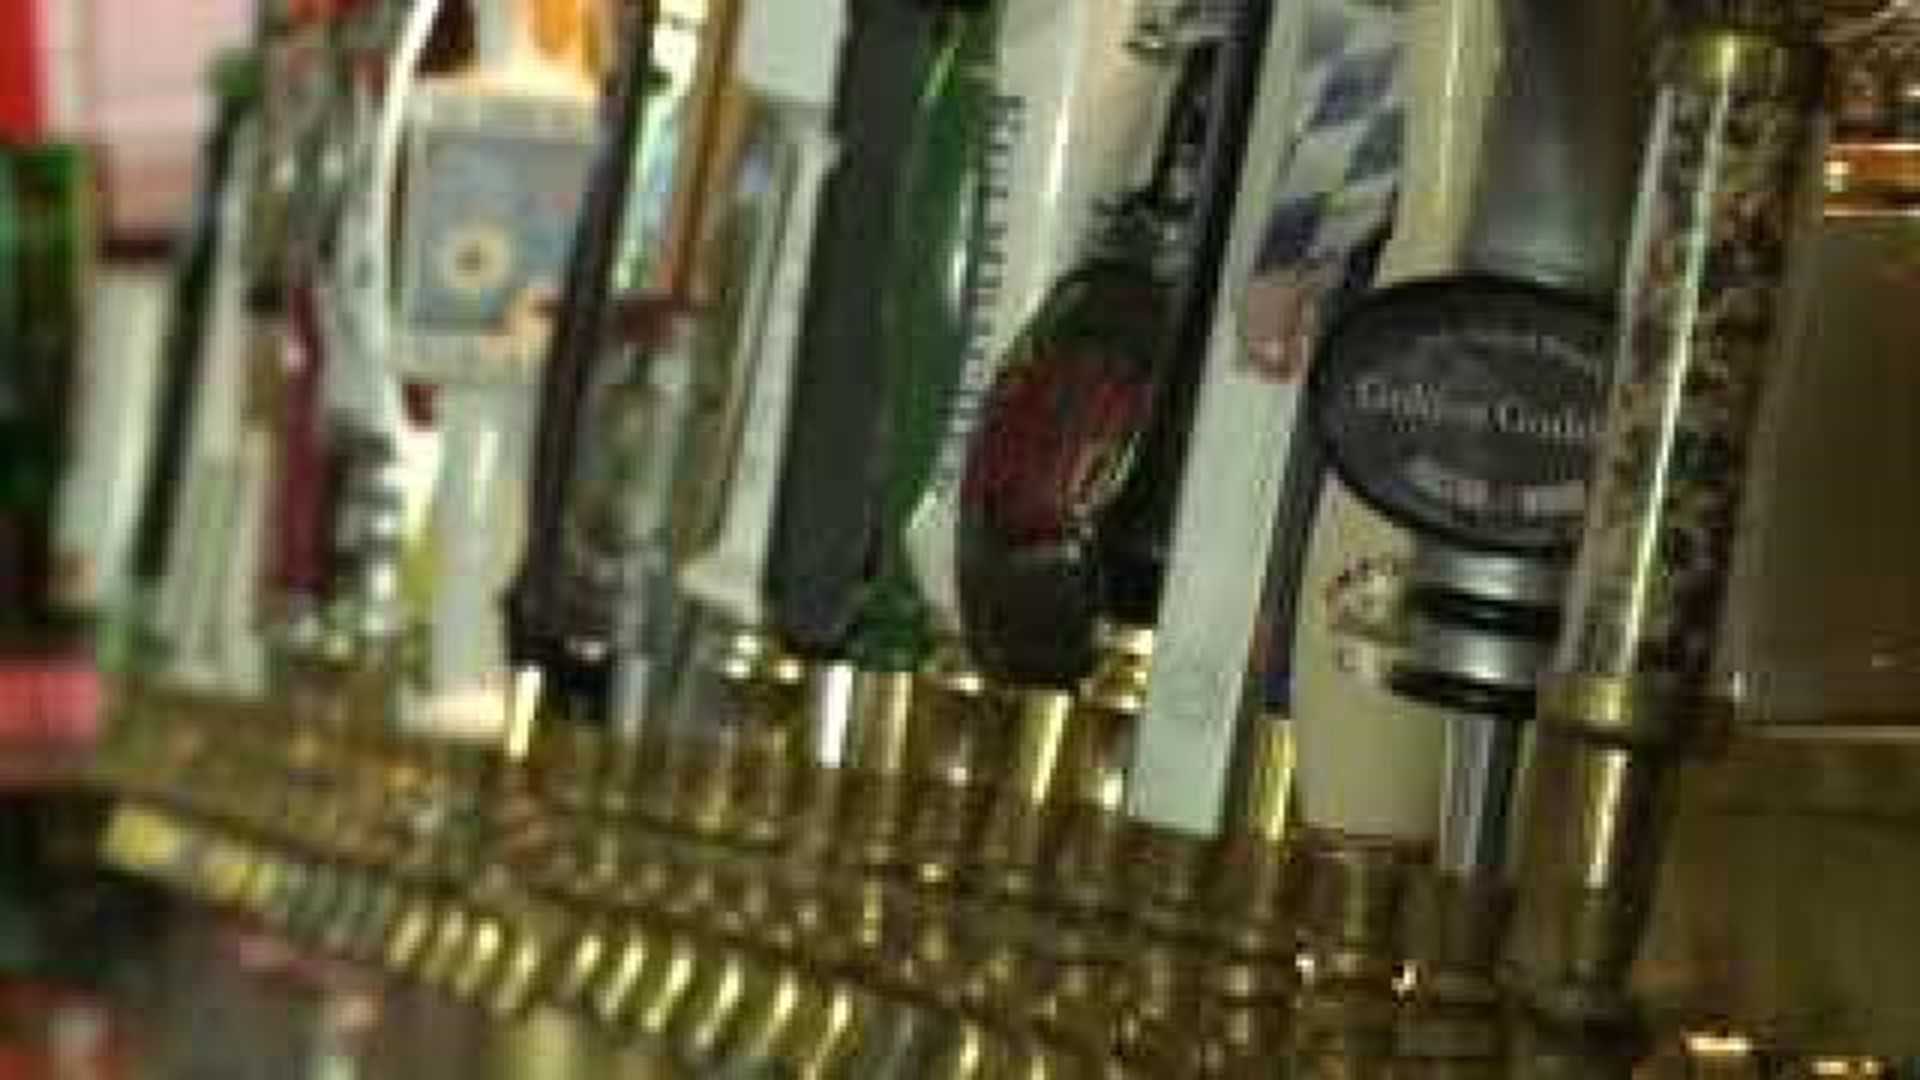 Bar patrons react to lowering legal alcohol limit